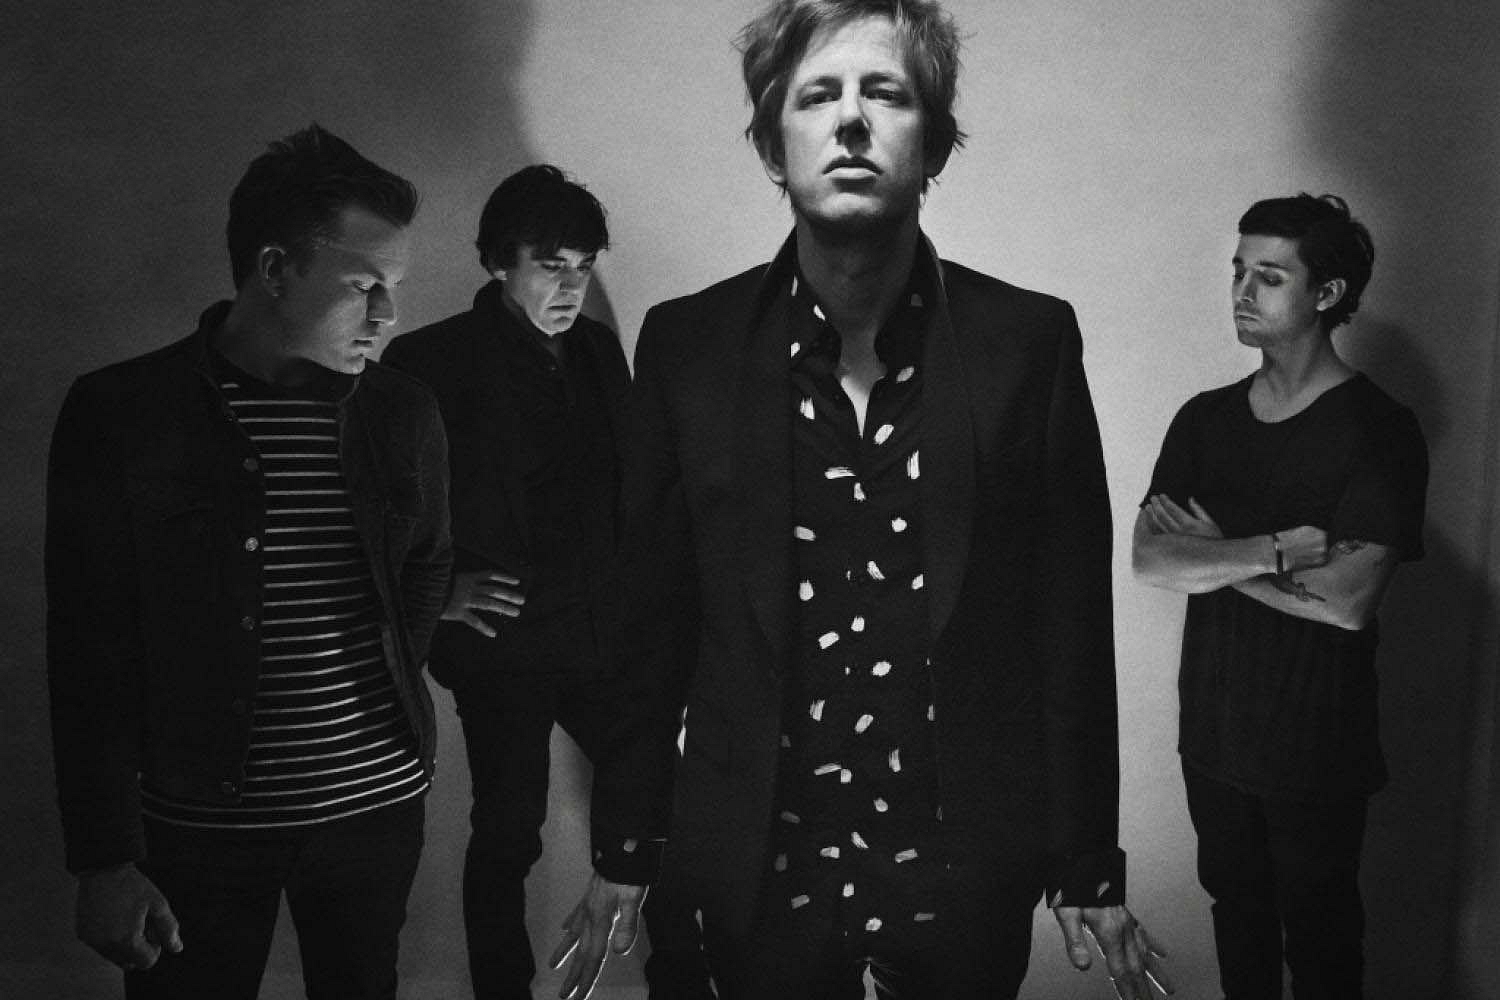 Spoon announce new best of compilation, with new track ‘No Bullets Spent’